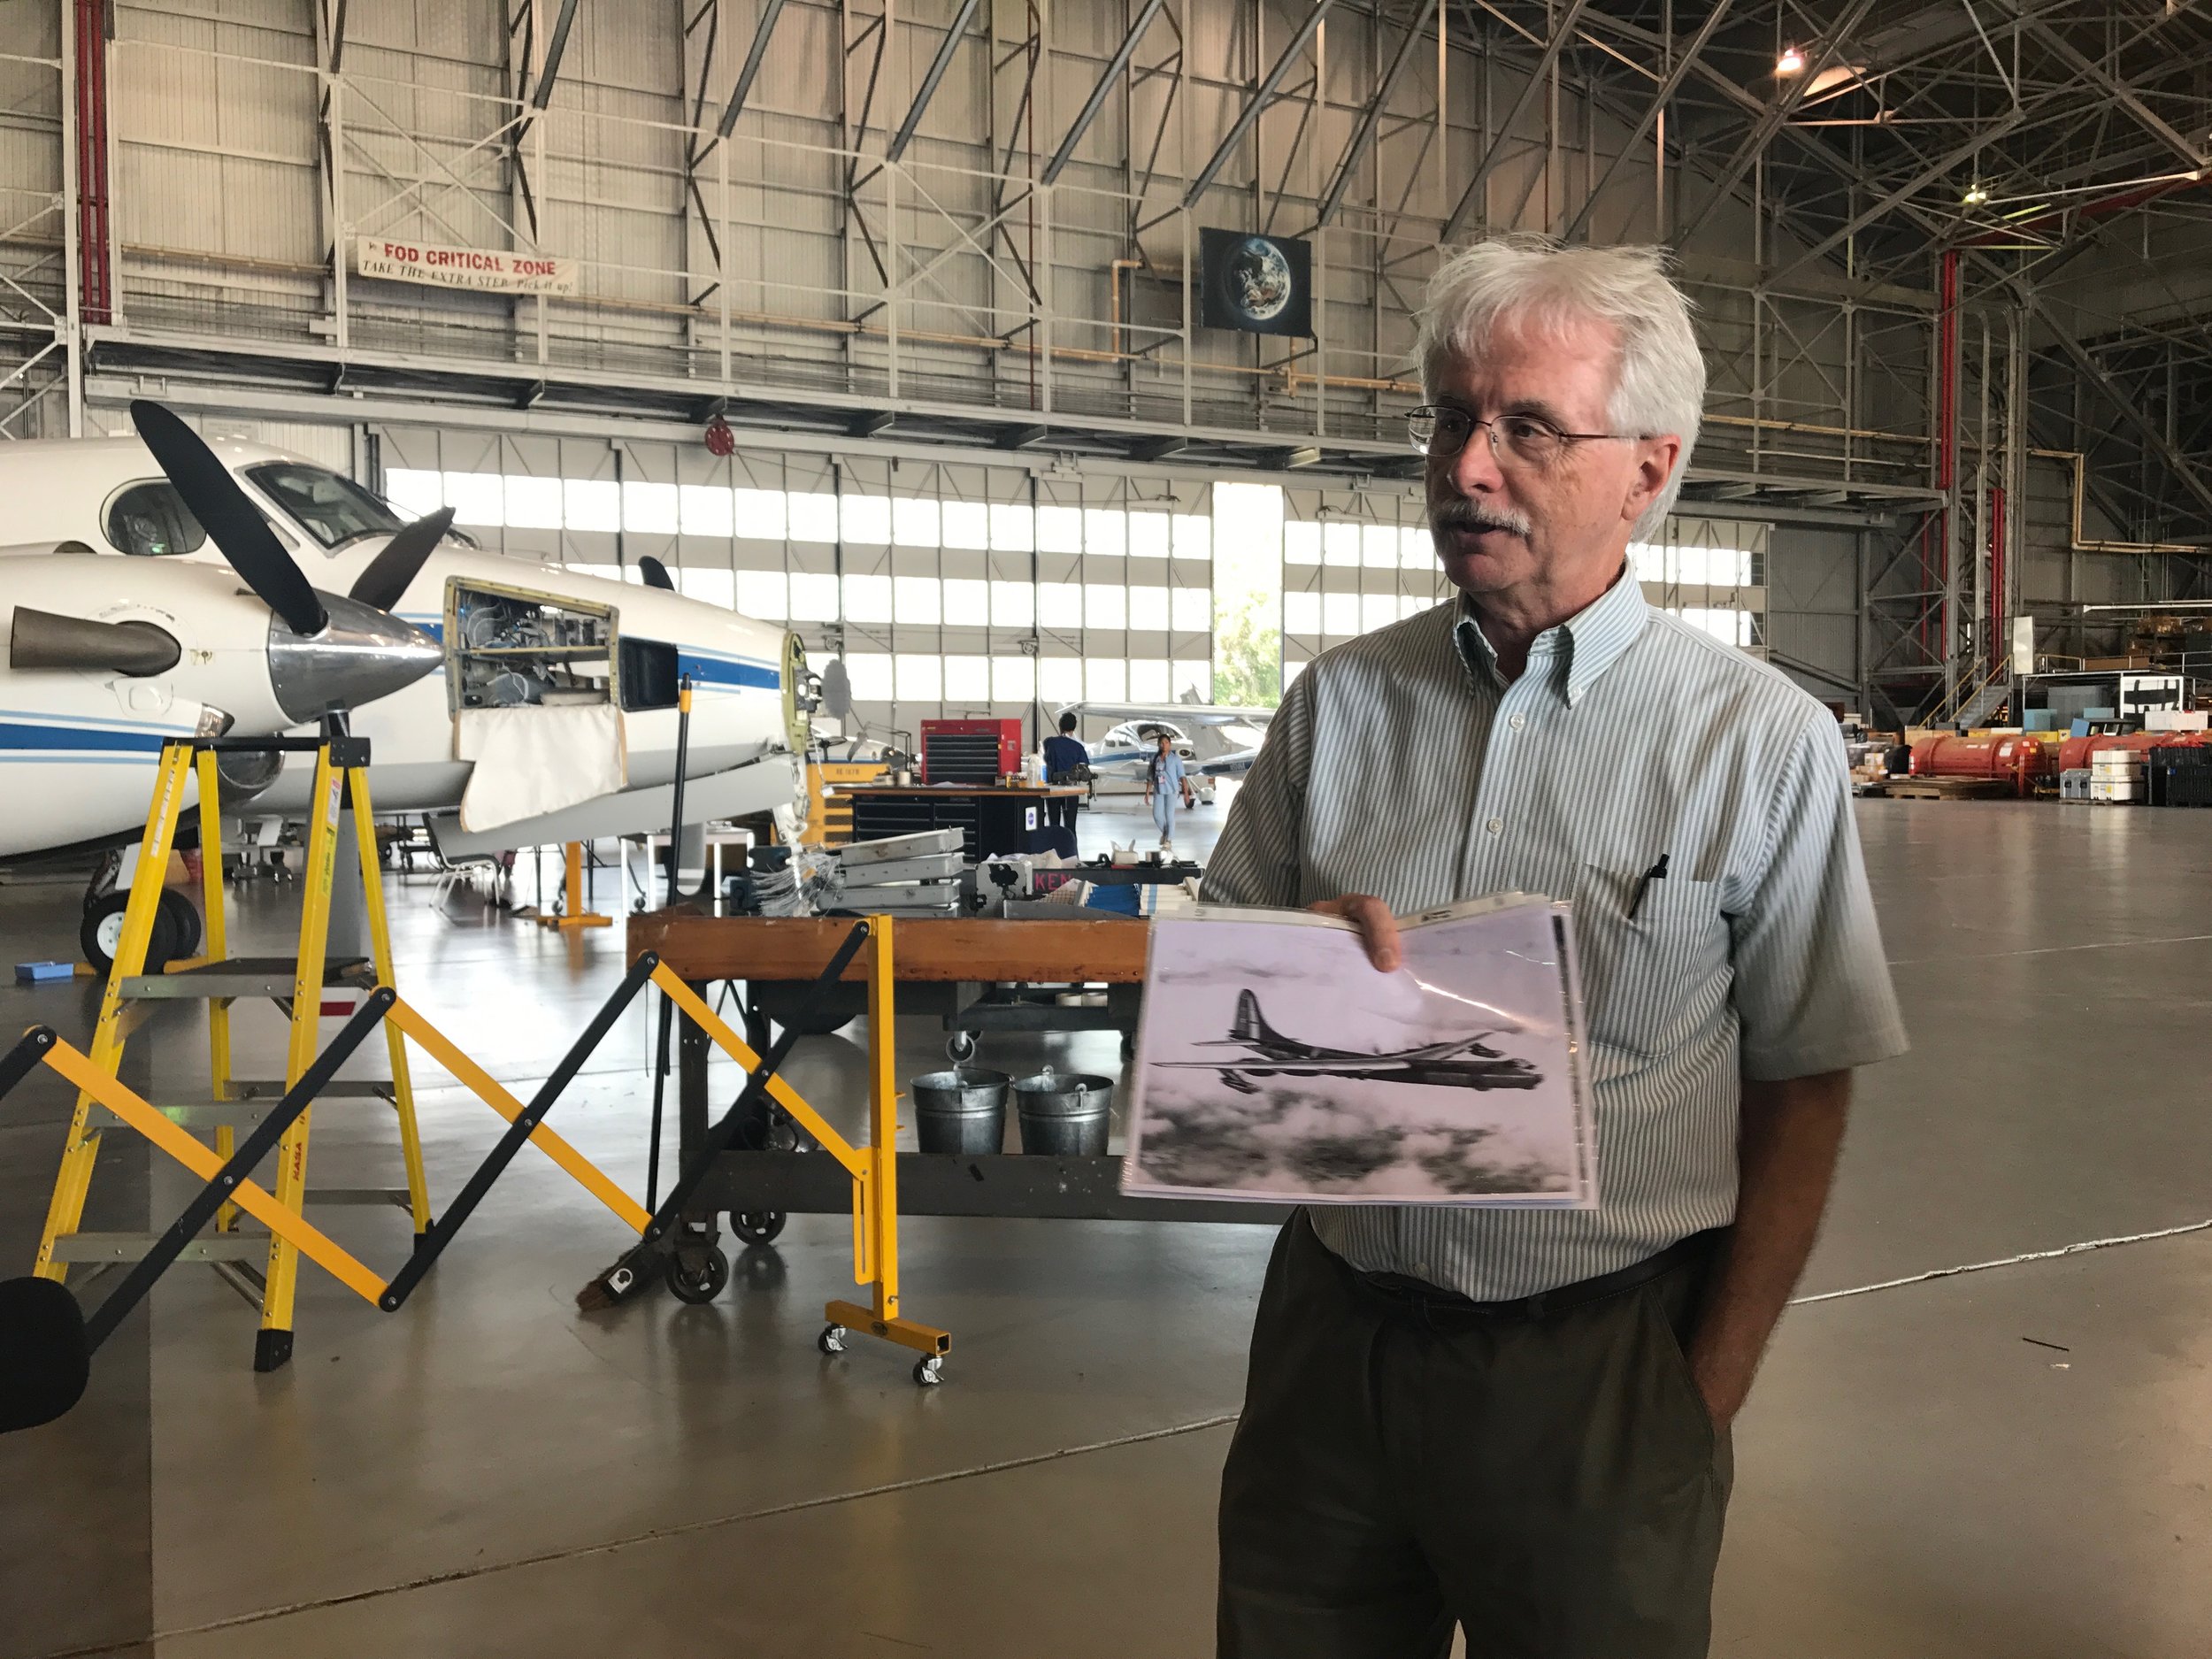 Bruce Fisher gives a tour of NASA Langley's hangar